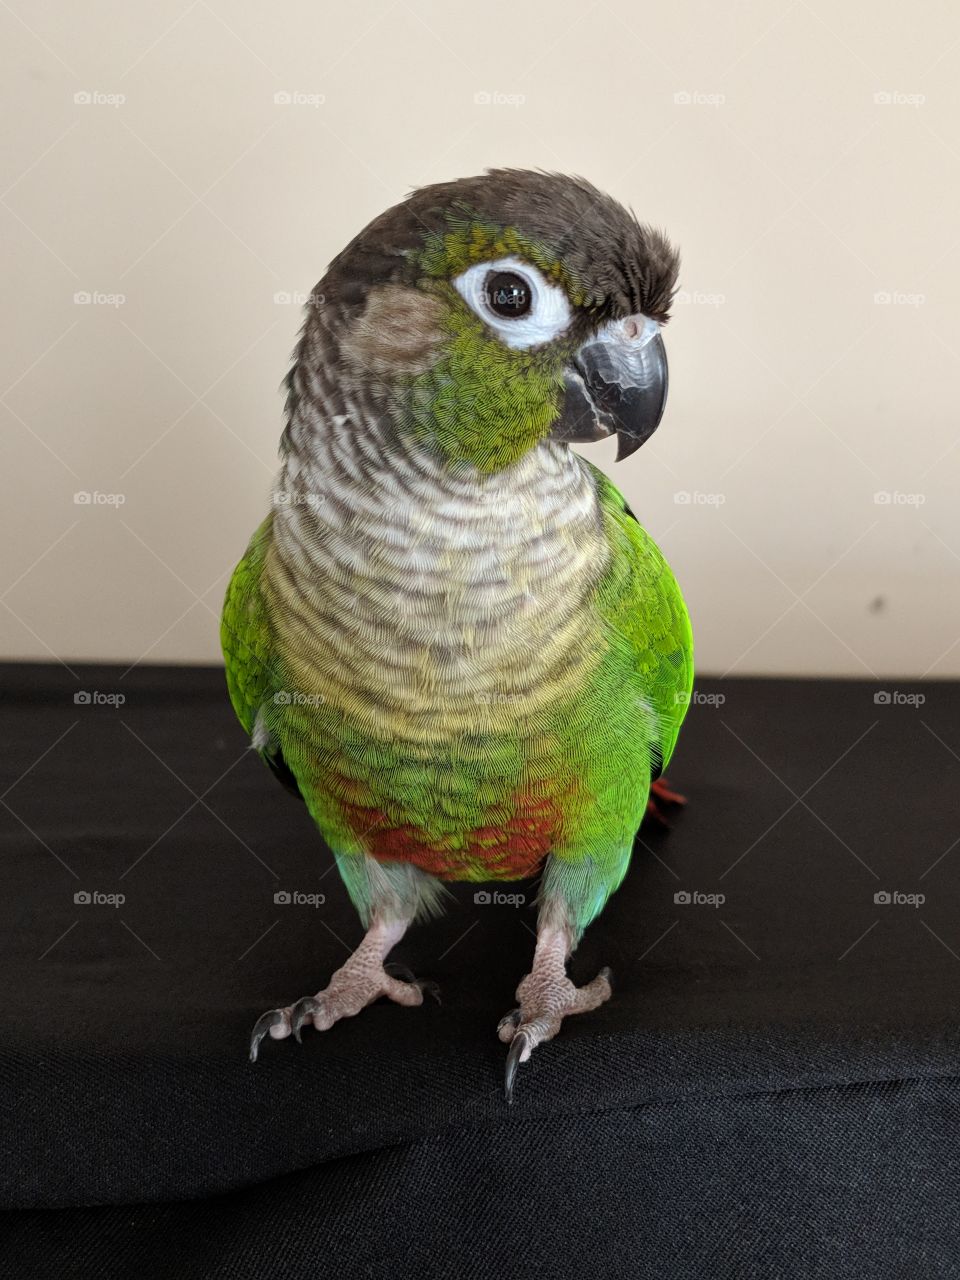 Tyler, the conure